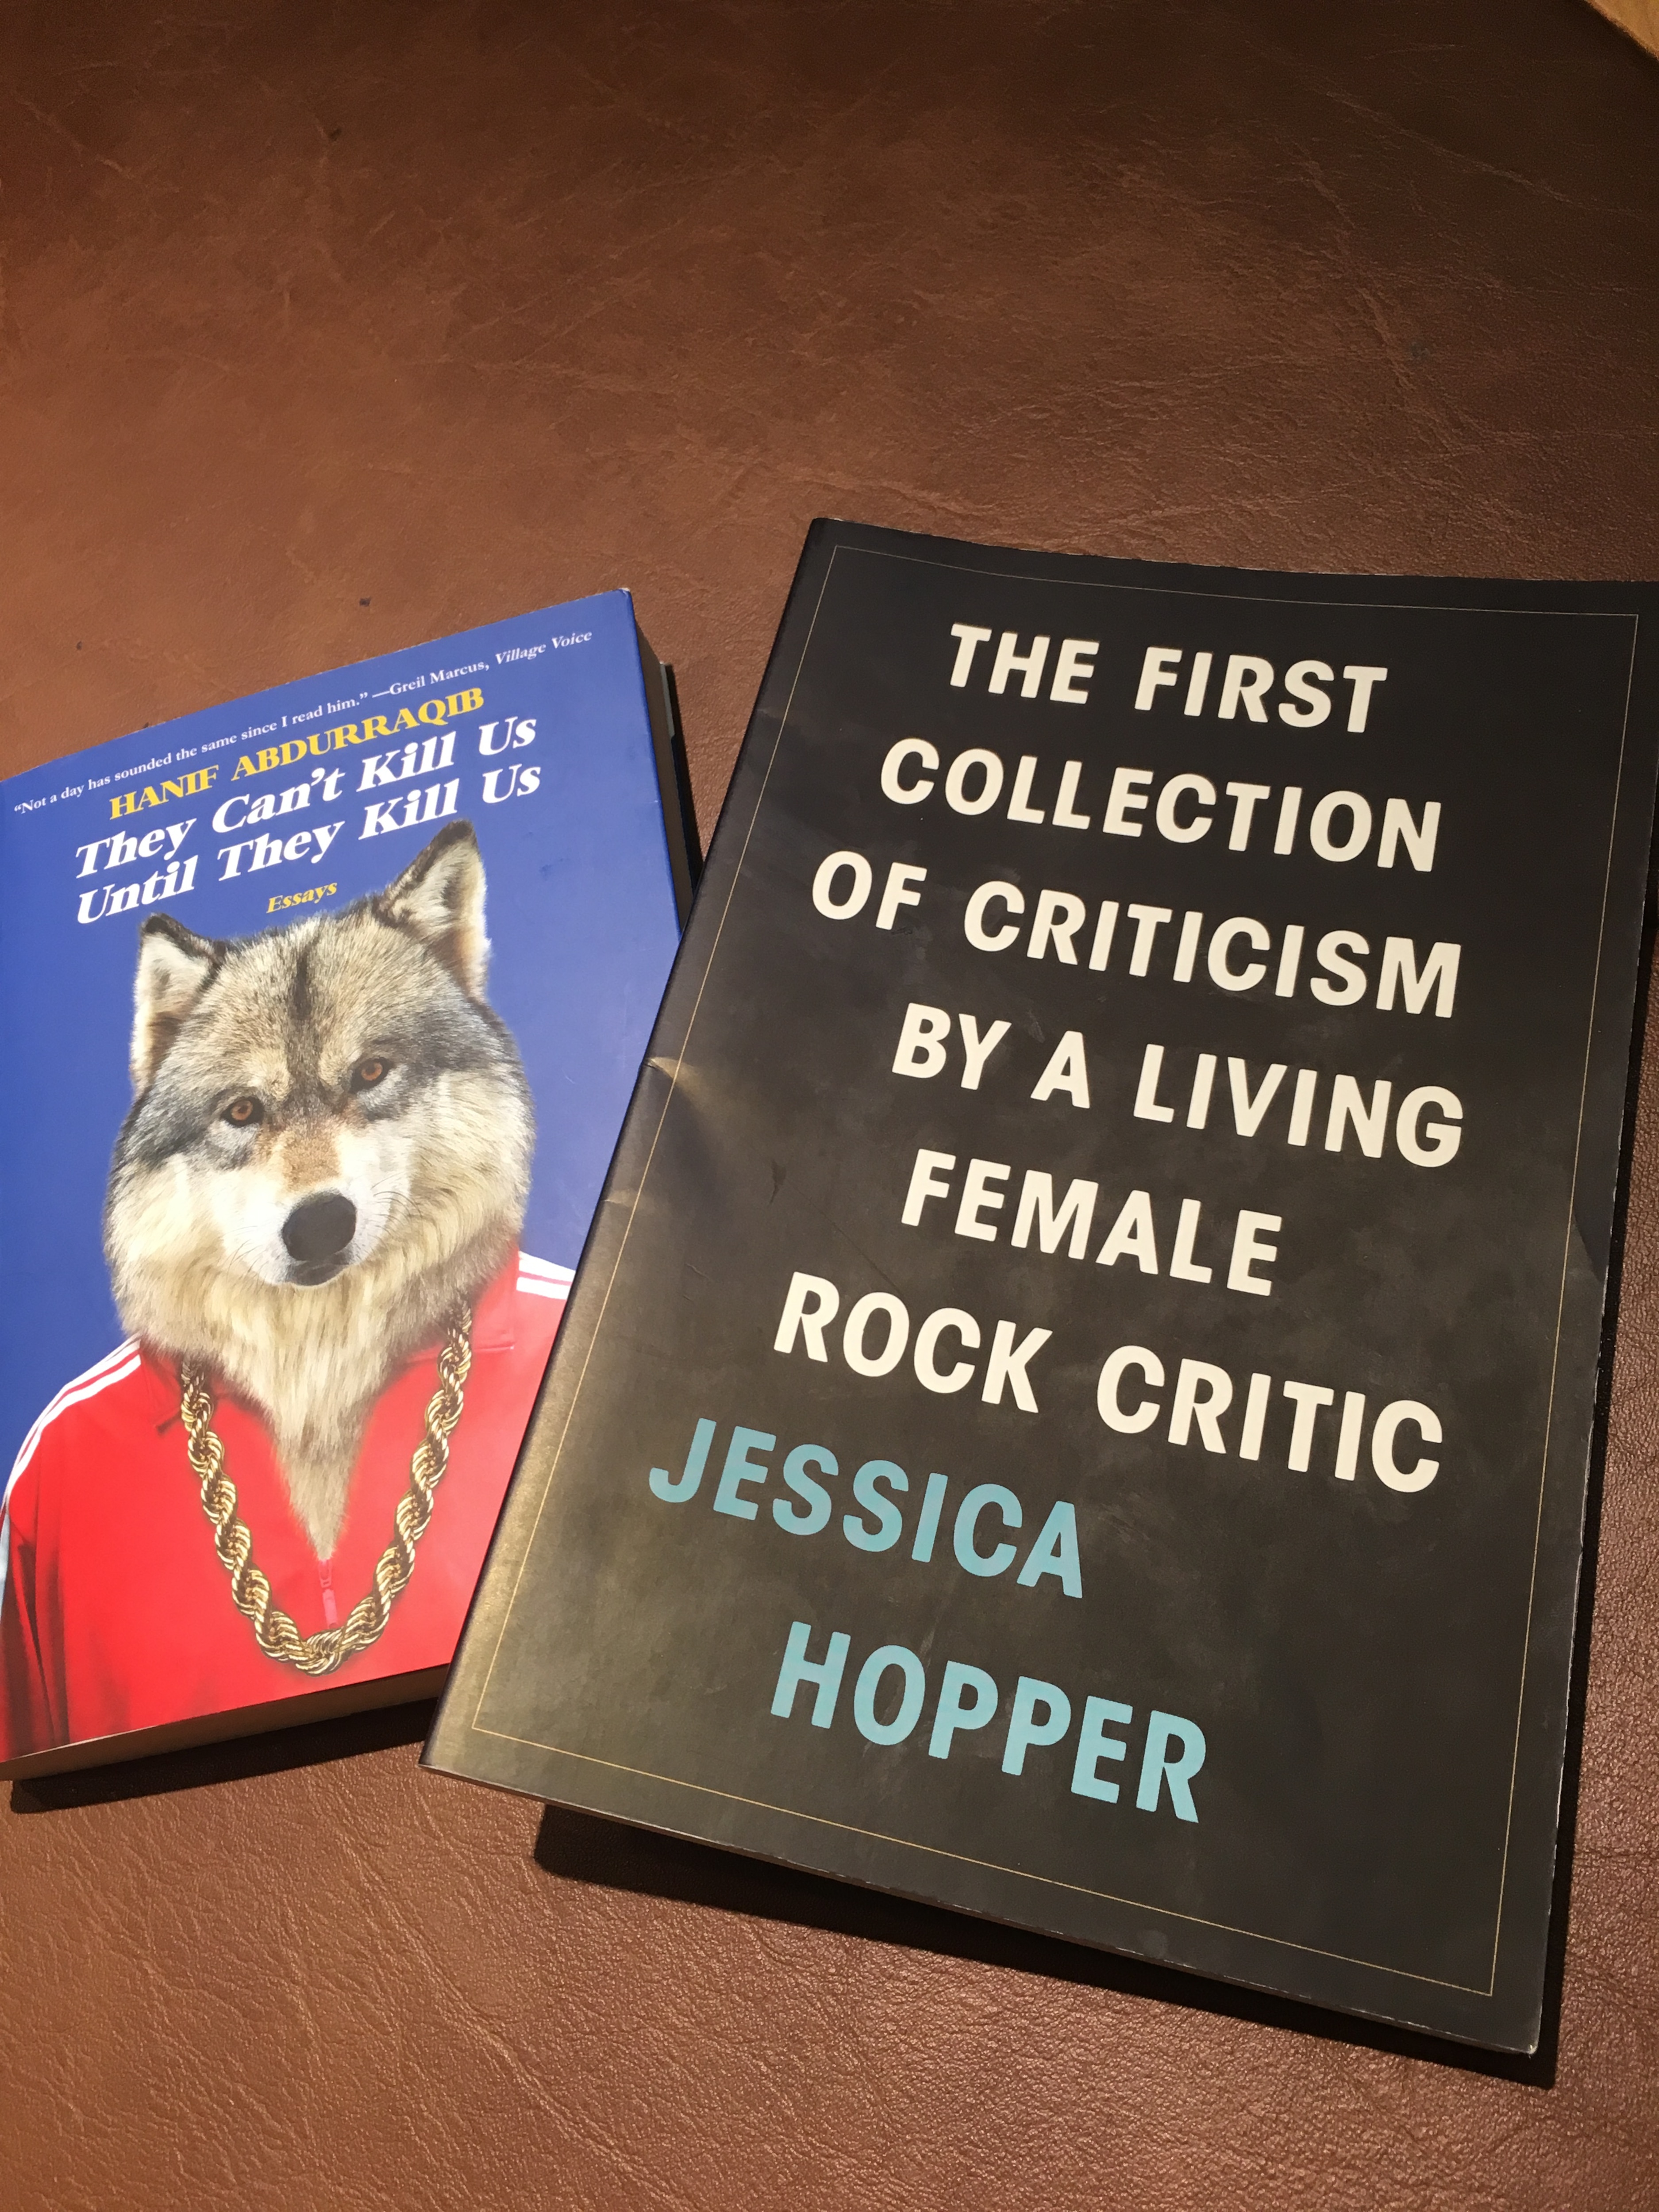 Les couvertures des livres « They Can't Kill Us Until They Kill Us » de Hanif Abdurraqib et « The First Collection of Criticism by a Living Female Rock Critic » de Jessical Hopper.  